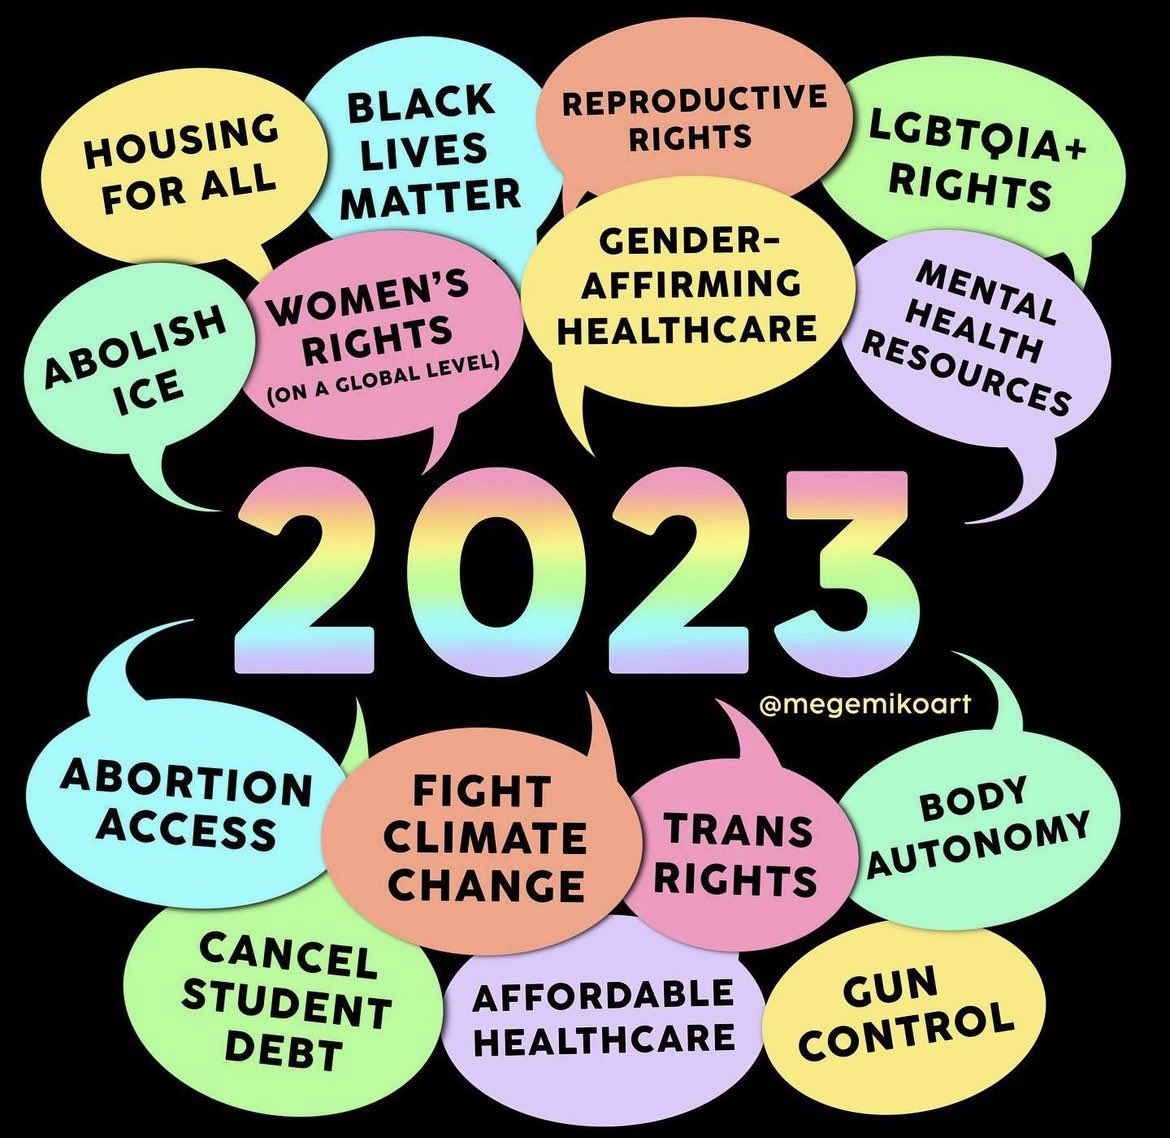 Raise your hand if you want 2023 to be the year we work on the below?🙋🏻‍♀️ #housingforall #BlackLivesMatter #reproductiverights #LGBTQIA #abolishice #WomensRights #genderaffirminghealthcare #mentalhealthsupport #AbortionIsHealthcare #ClimateAction   #StudentDebt #GunControl